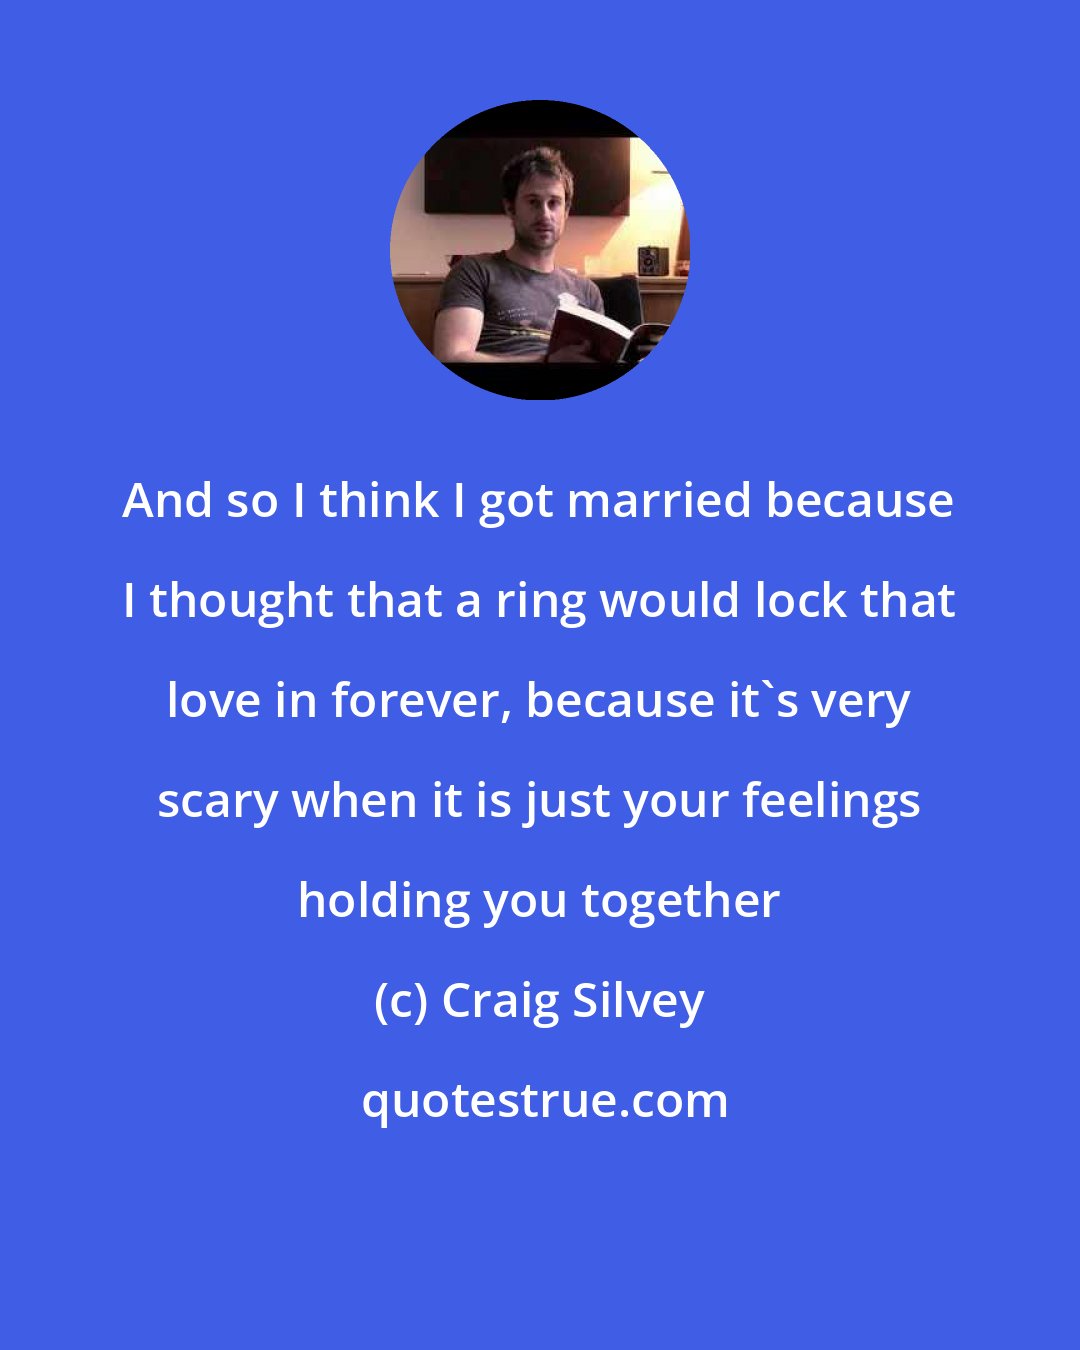 Craig Silvey: And so I think I got married because I thought that a ring would lock that love in forever, because it's very scary when it is just your feelings holding you together